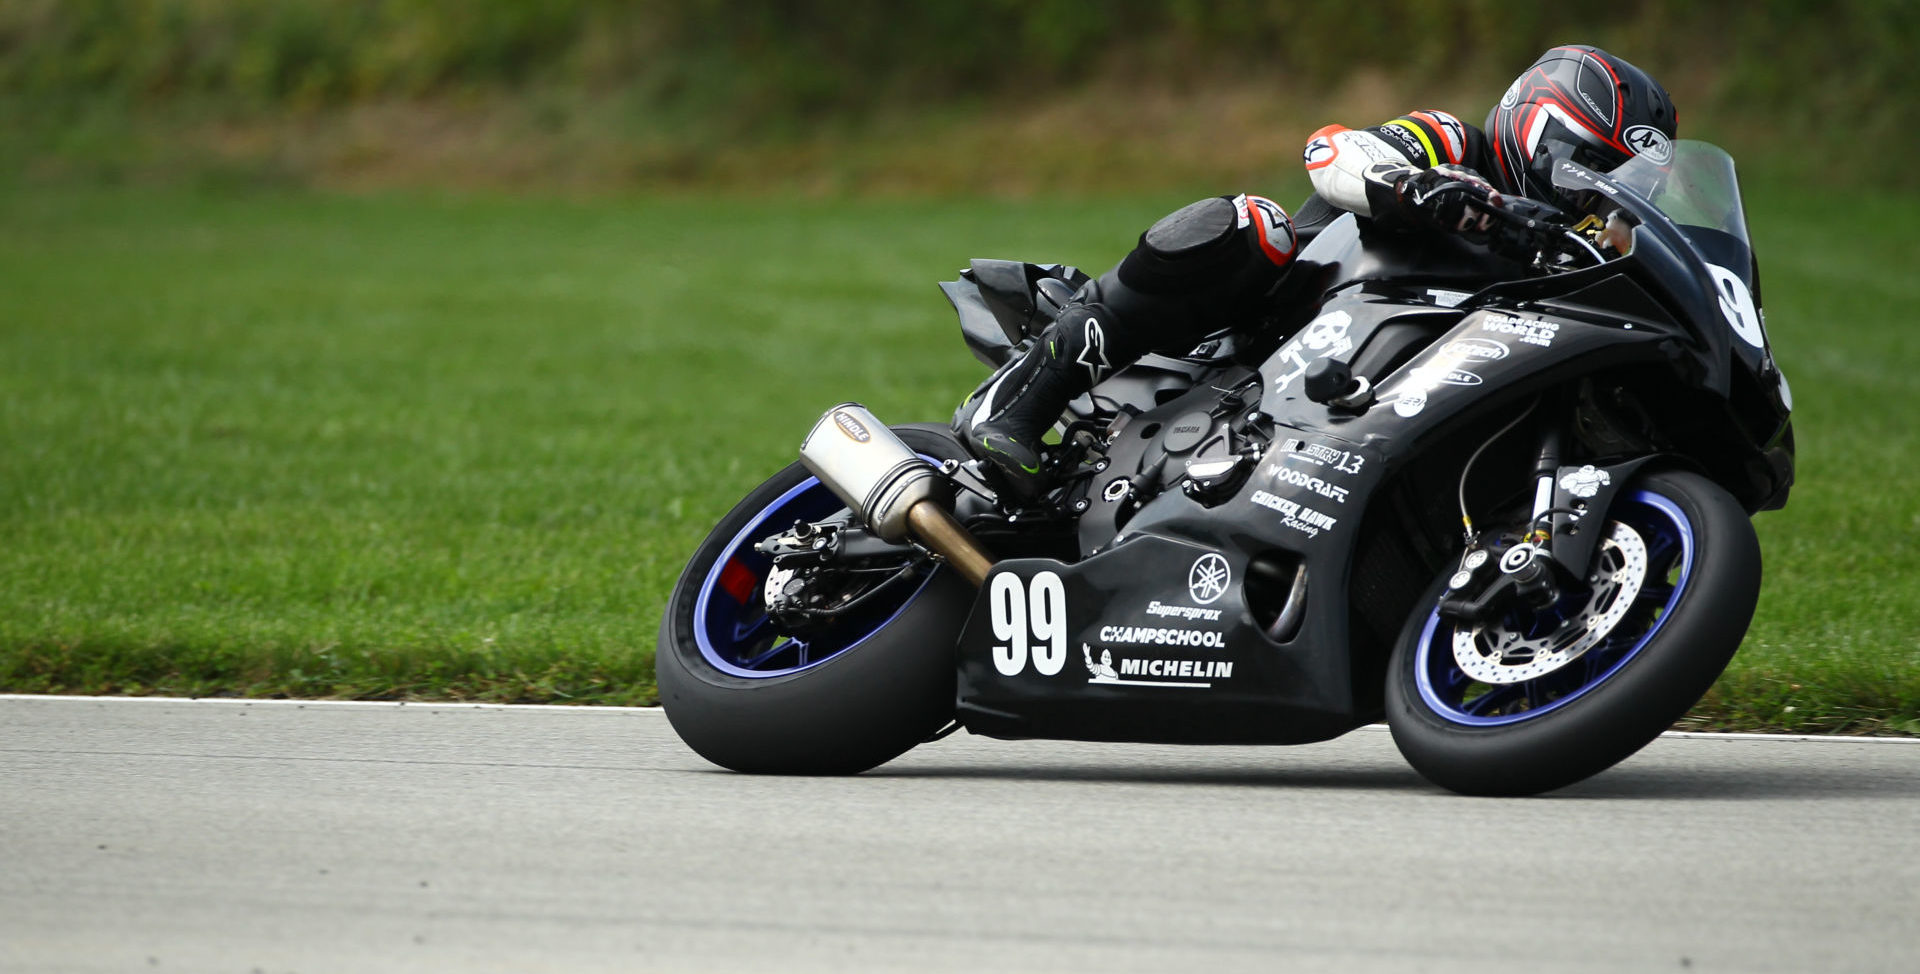 Andrew Lee (99) on the Army of Darkness Yamaha YZF-R1 at PittRace. Photo by Photos by Marty, LLC, courtesy Army of Darkness.